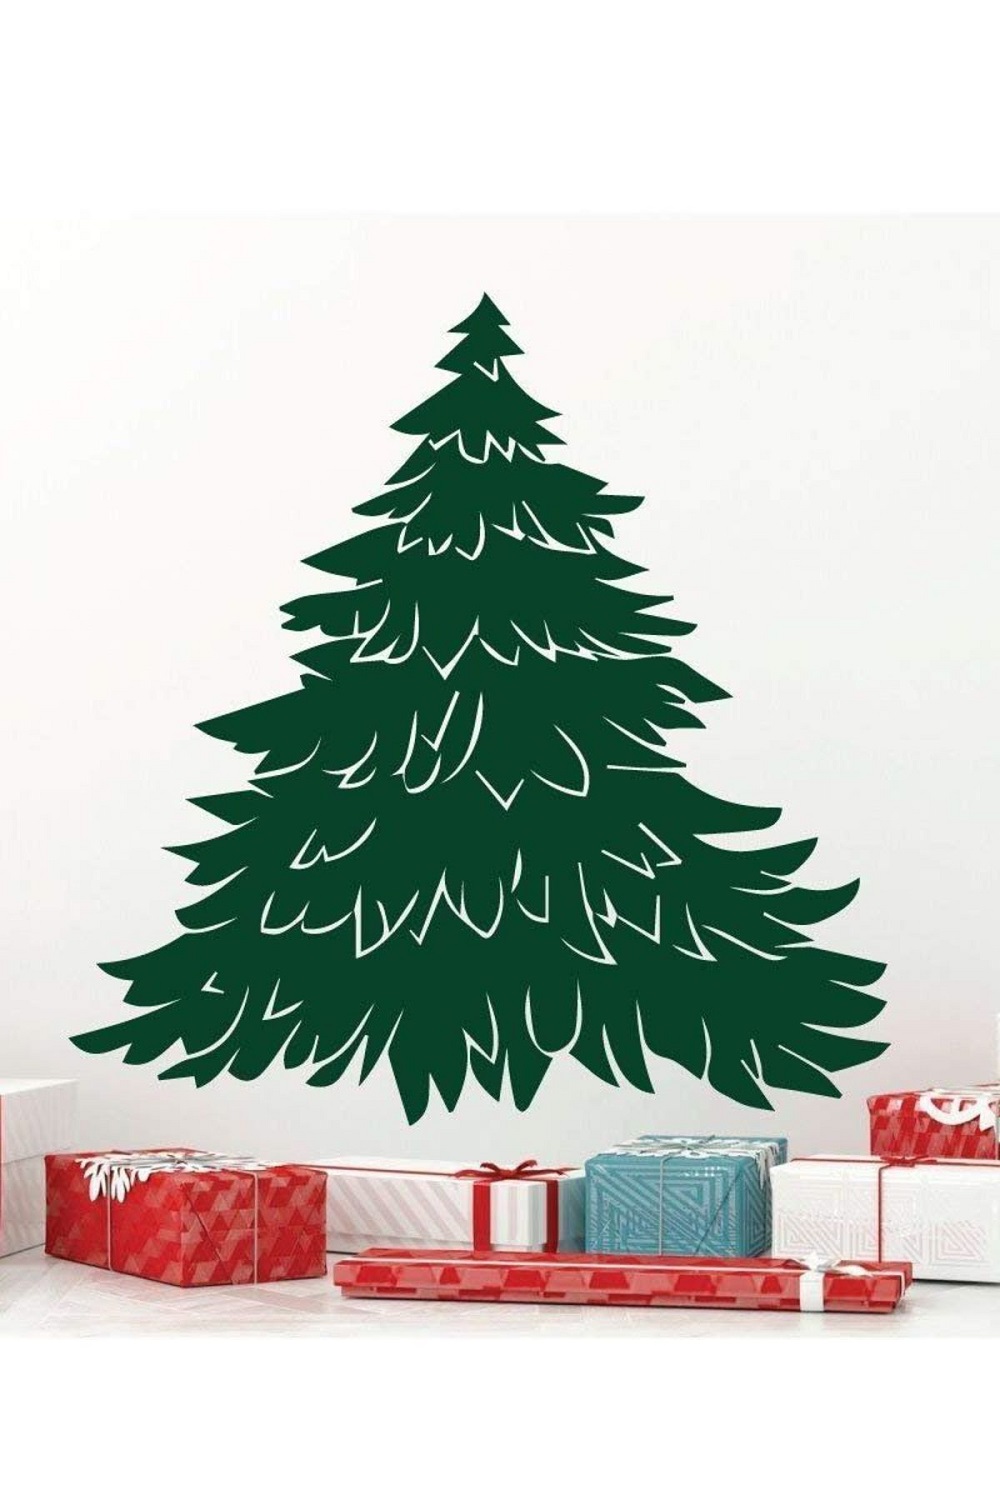 t4-2 Unconventional Christmas tree ideas you can use in your living room